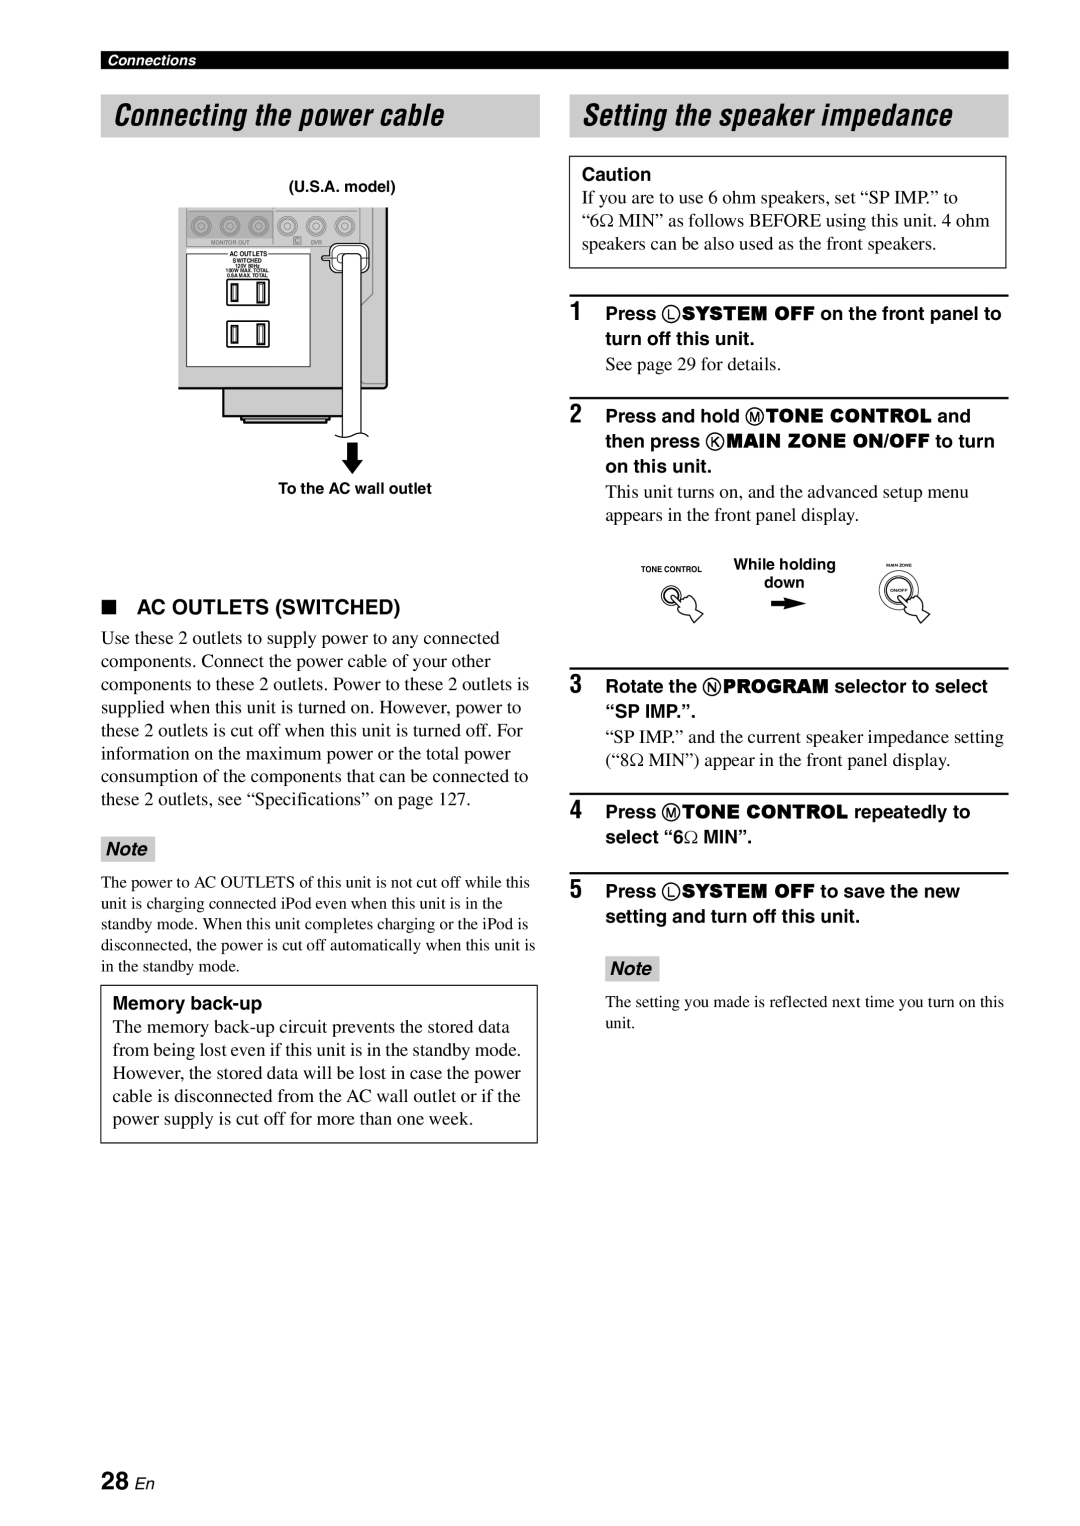 Yamaha HTR-6180 owner manual 28 En, Ac Outlets Switched, Connecting the power cable, Setting the speaker impedance 